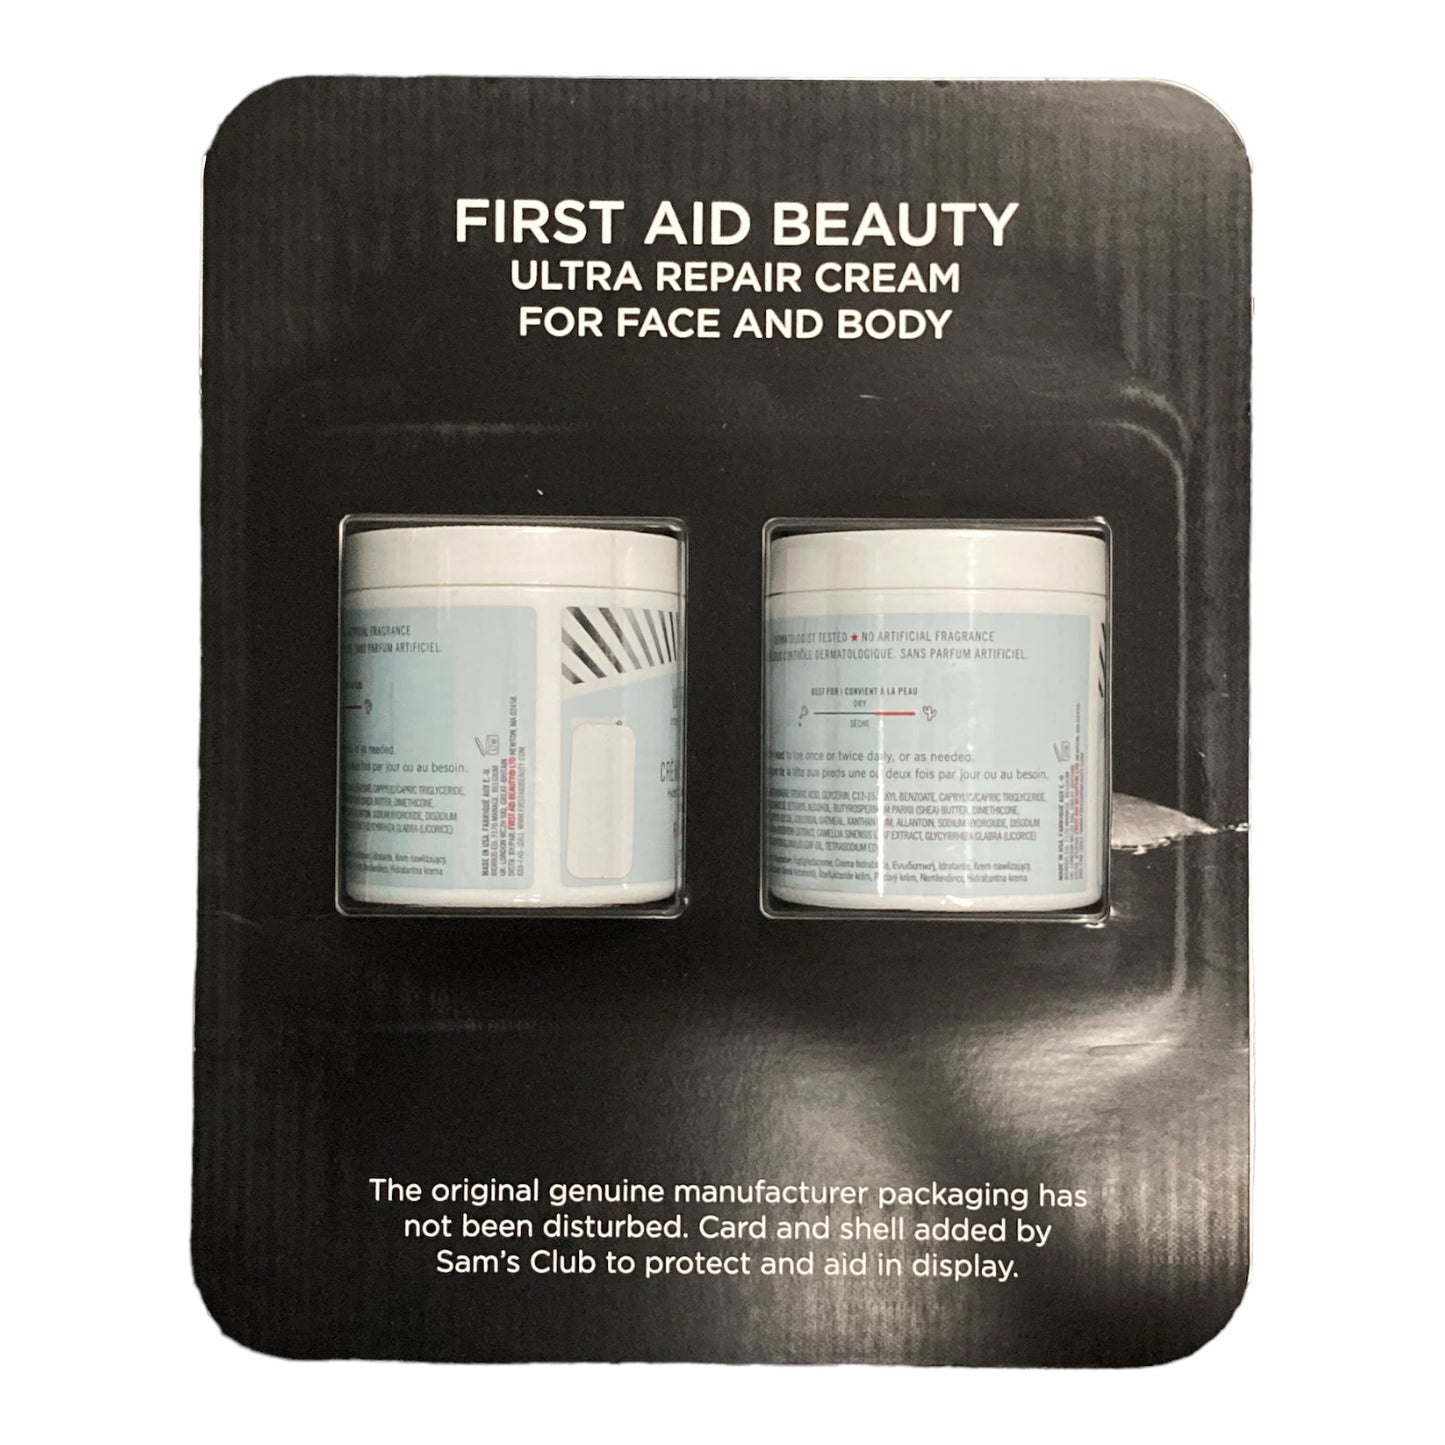 First Aid Beauty Hydration Hero Ultra Repair Cream Duo 6 Ounce (Pack of 2)